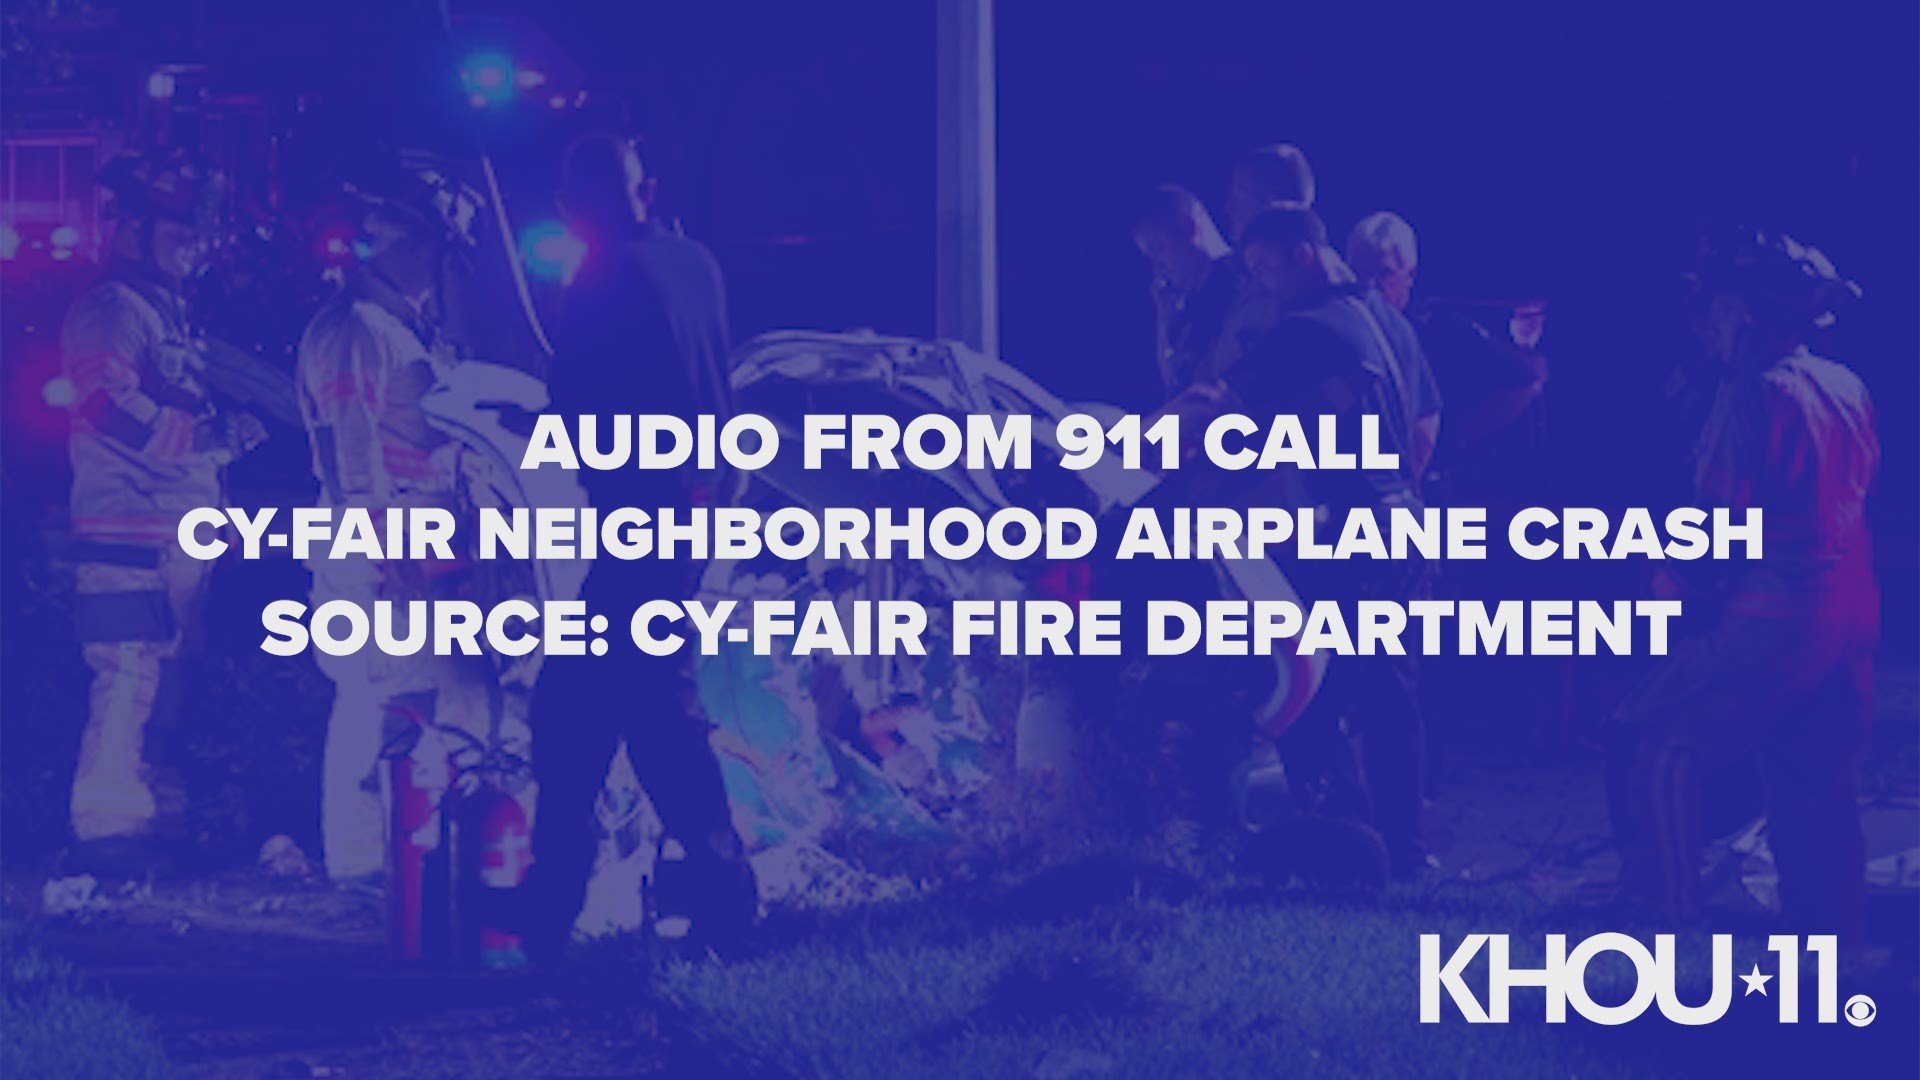 Cy-Fair firefighters have released the audio file from a 911 call made to dispatchers following a single-engine plane crash in a residential area.